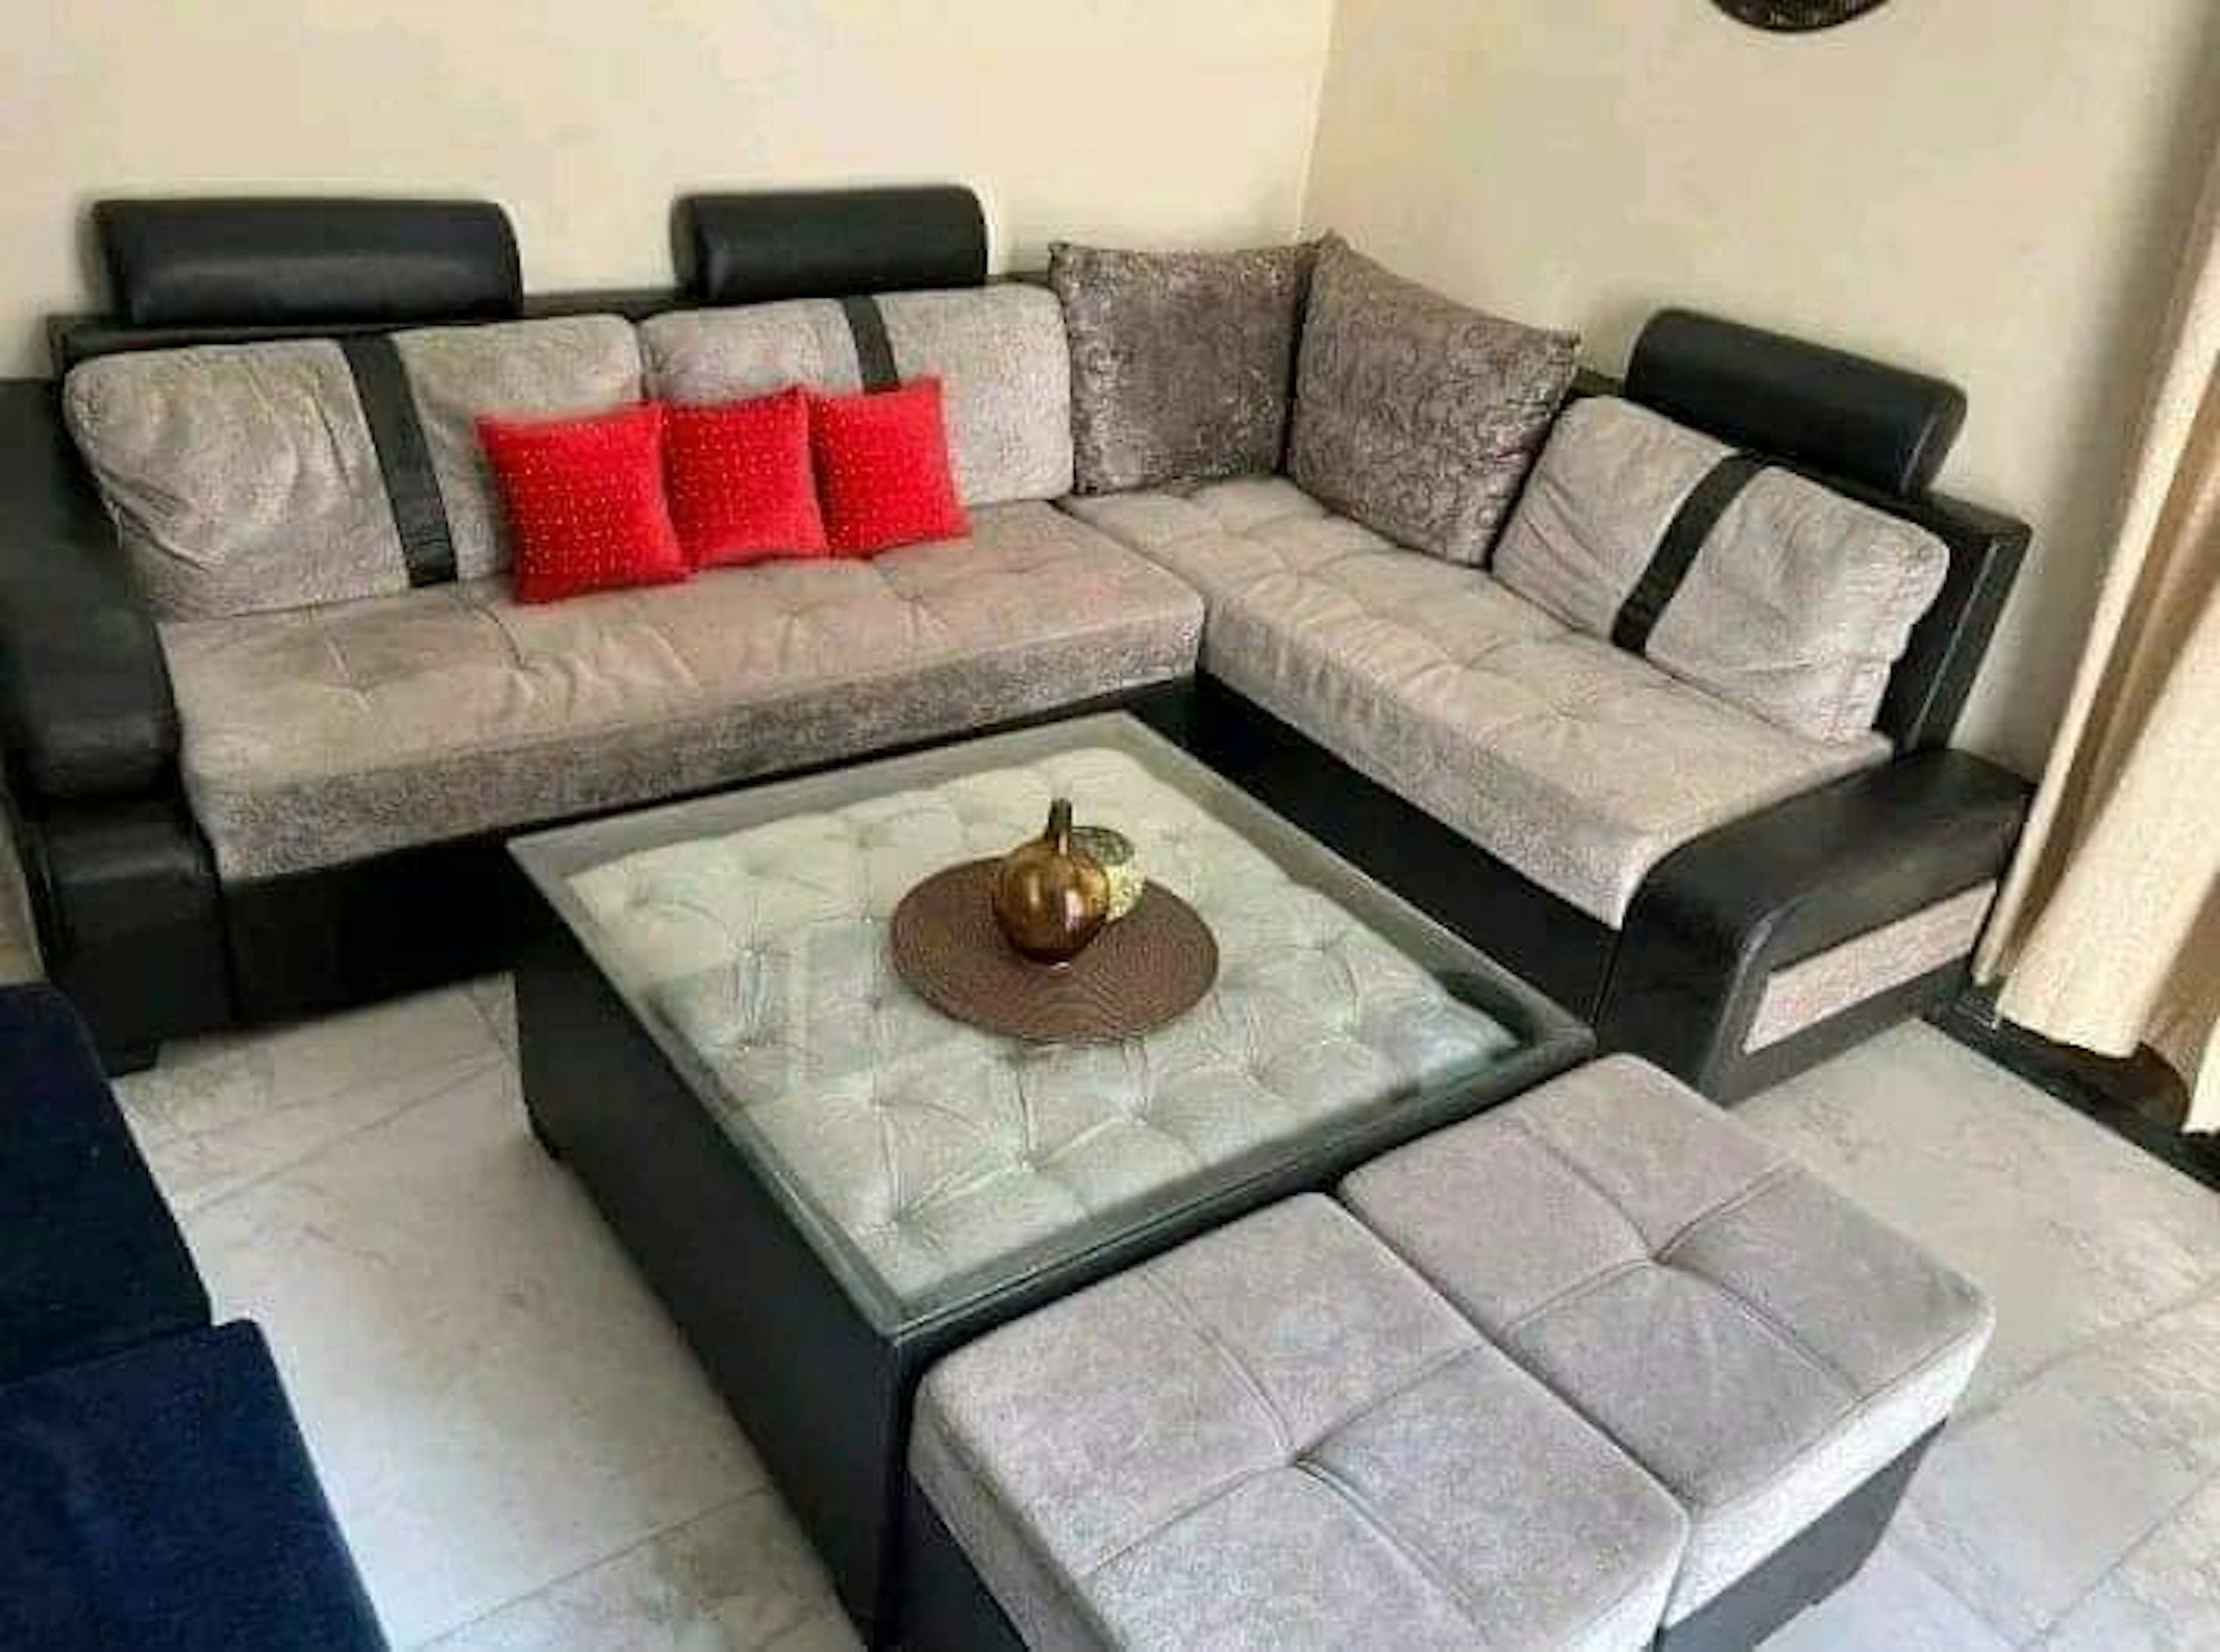 View - Sofa set  photos, Sofa set  available in Pune, make deal in 10000